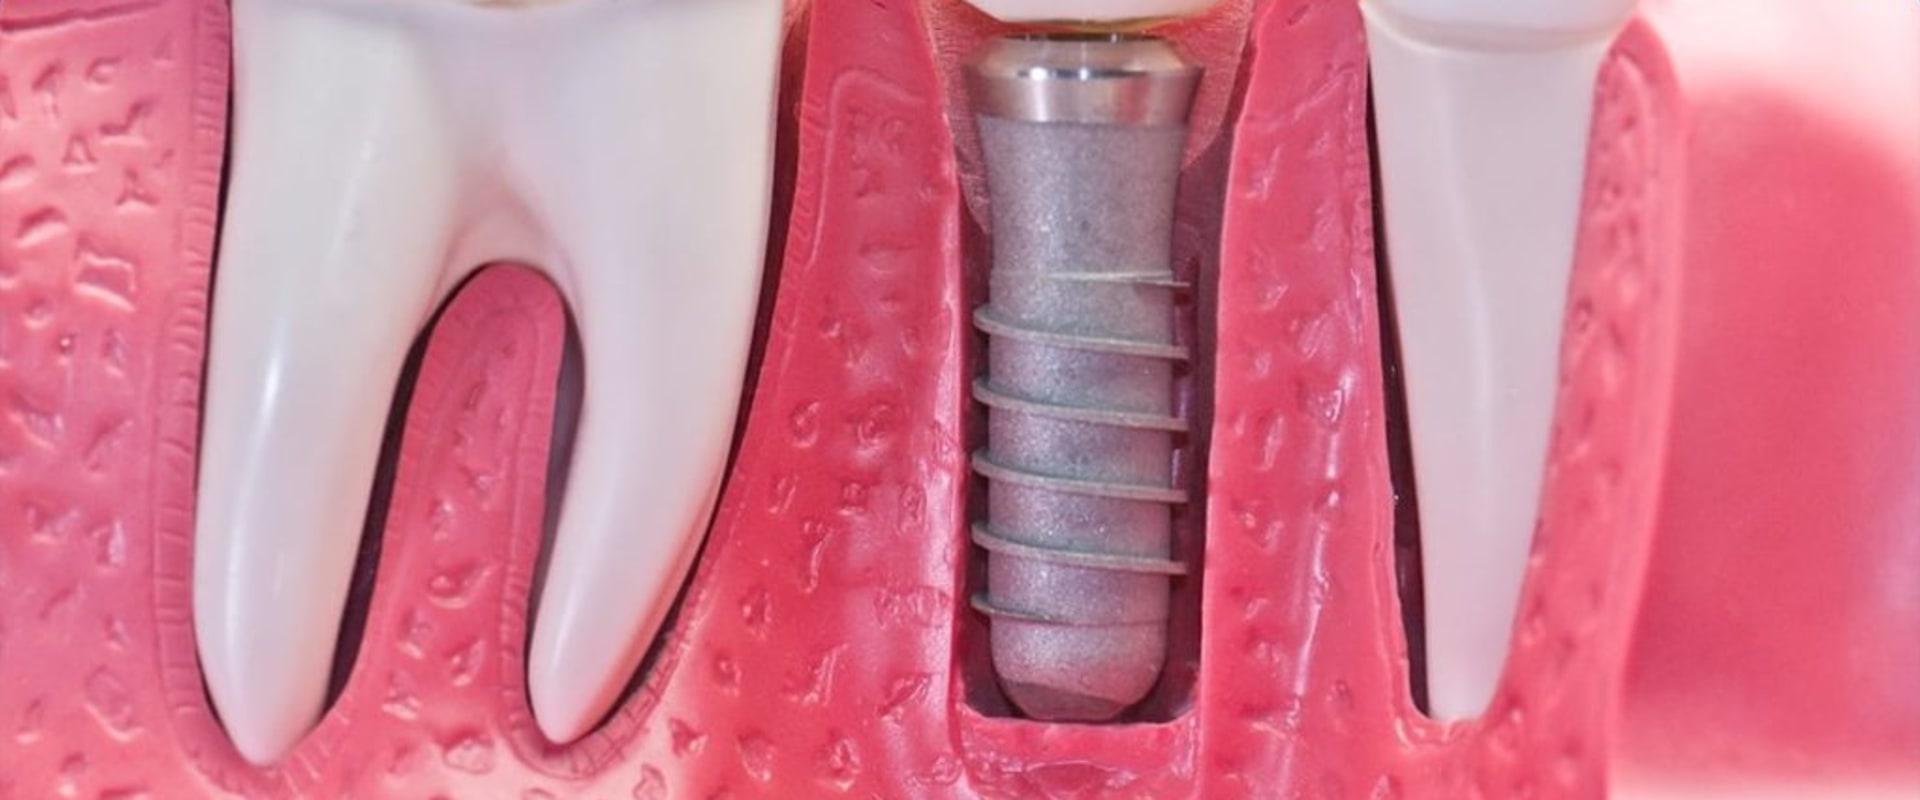 Which dental insurance covers implants?